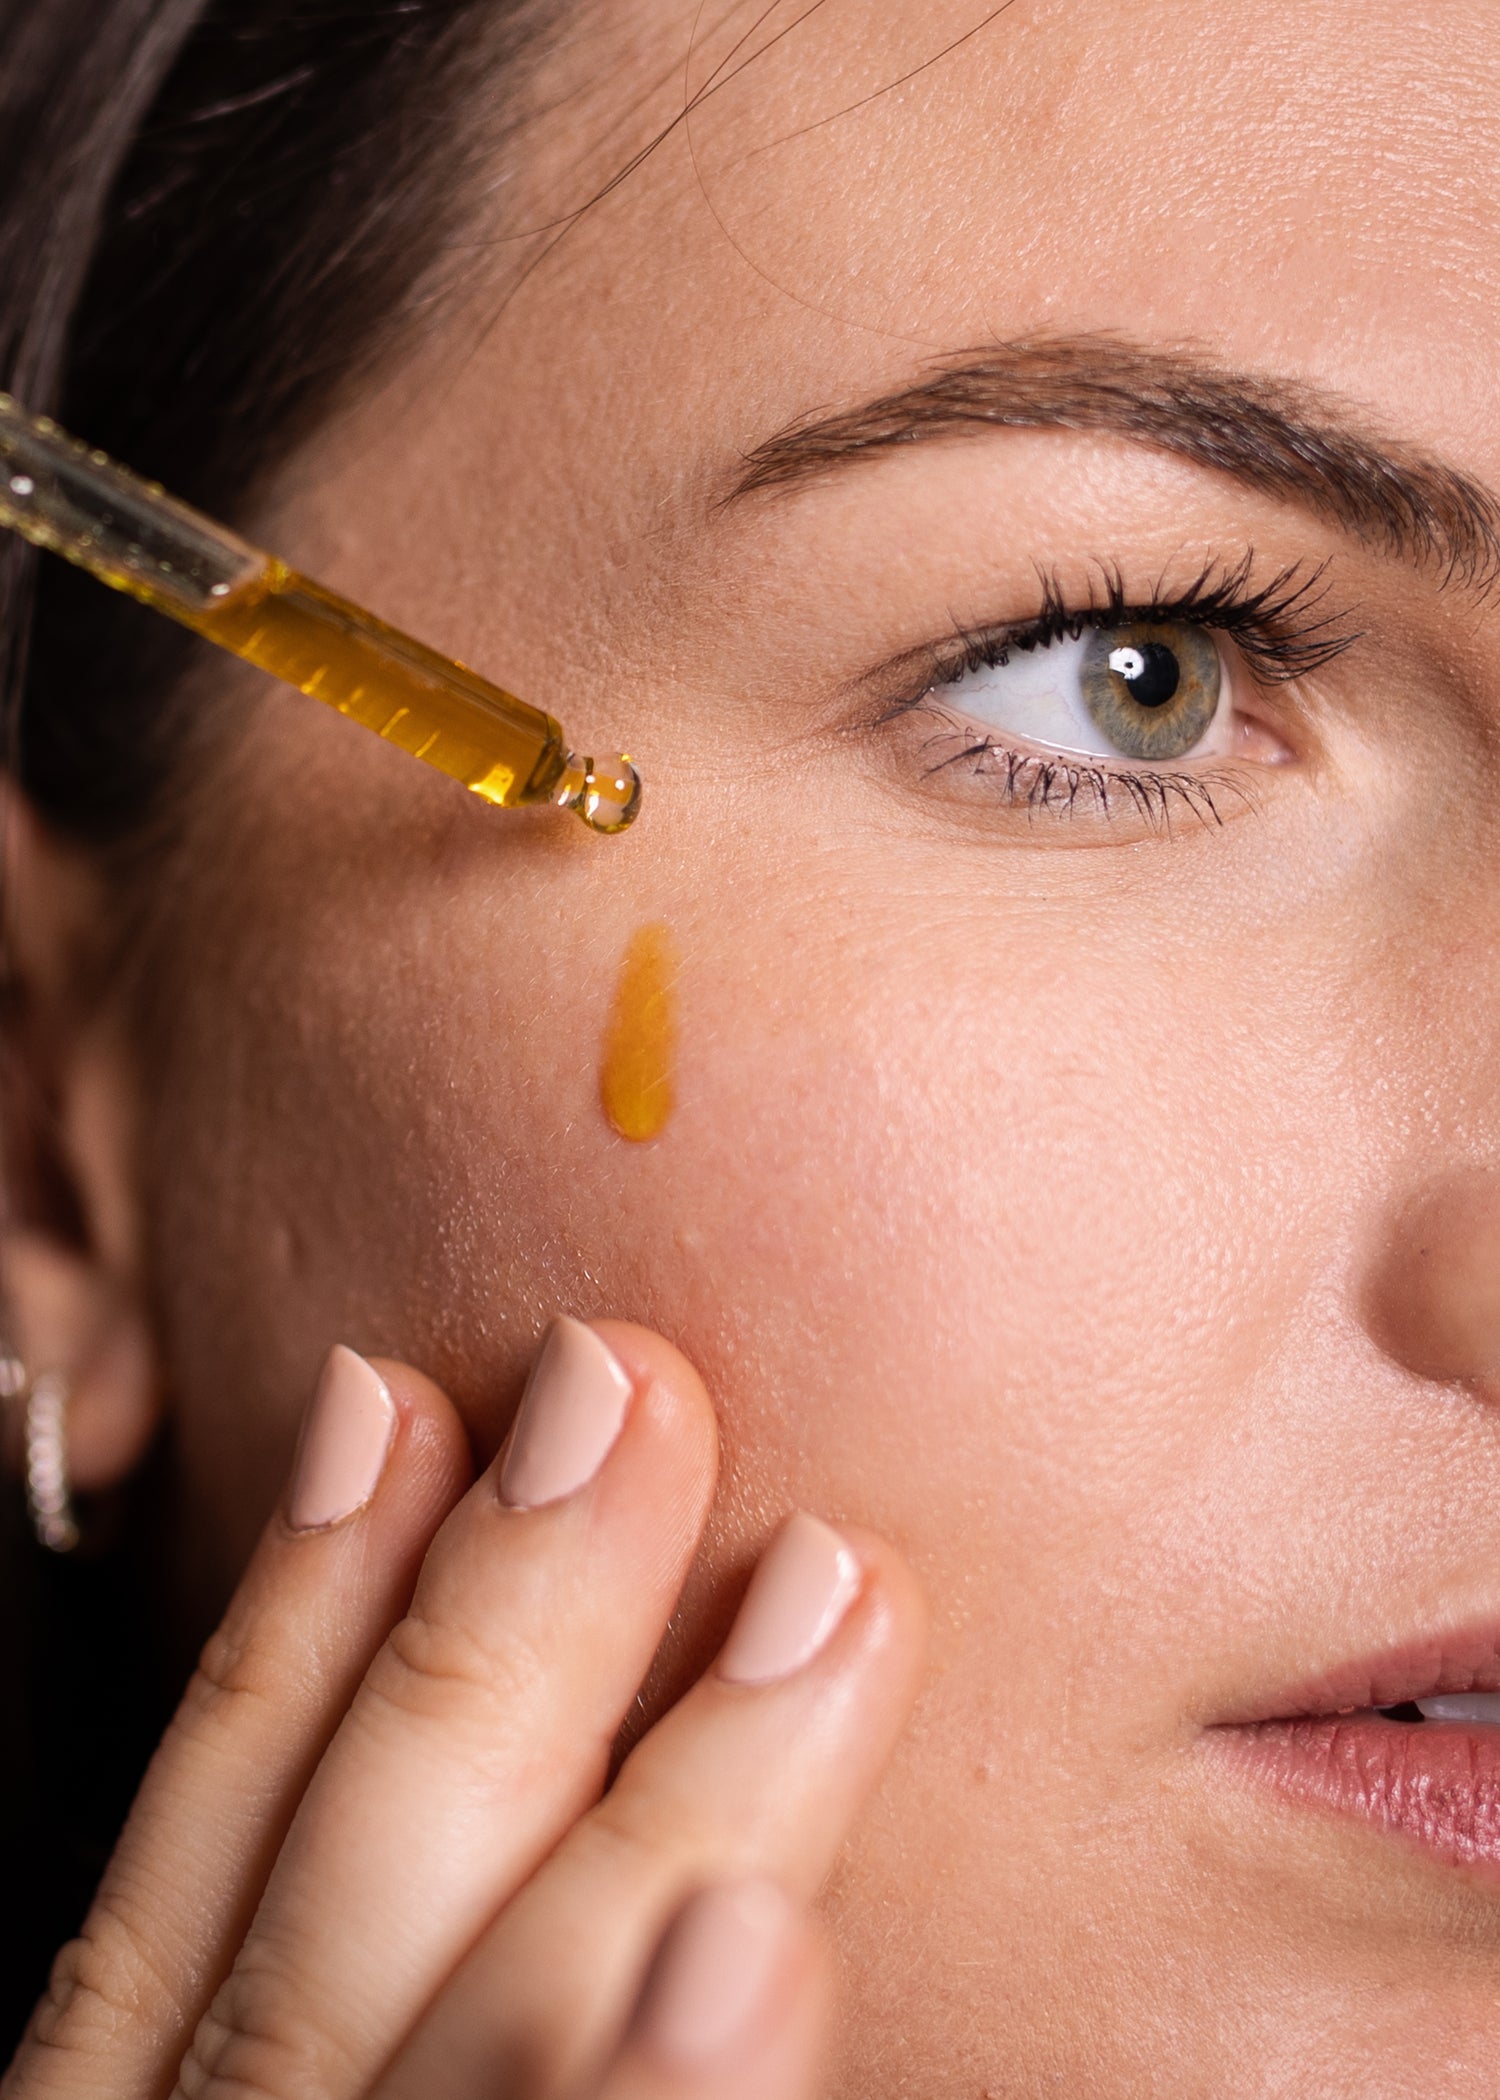 How to integrate an Oil into your skincare routine